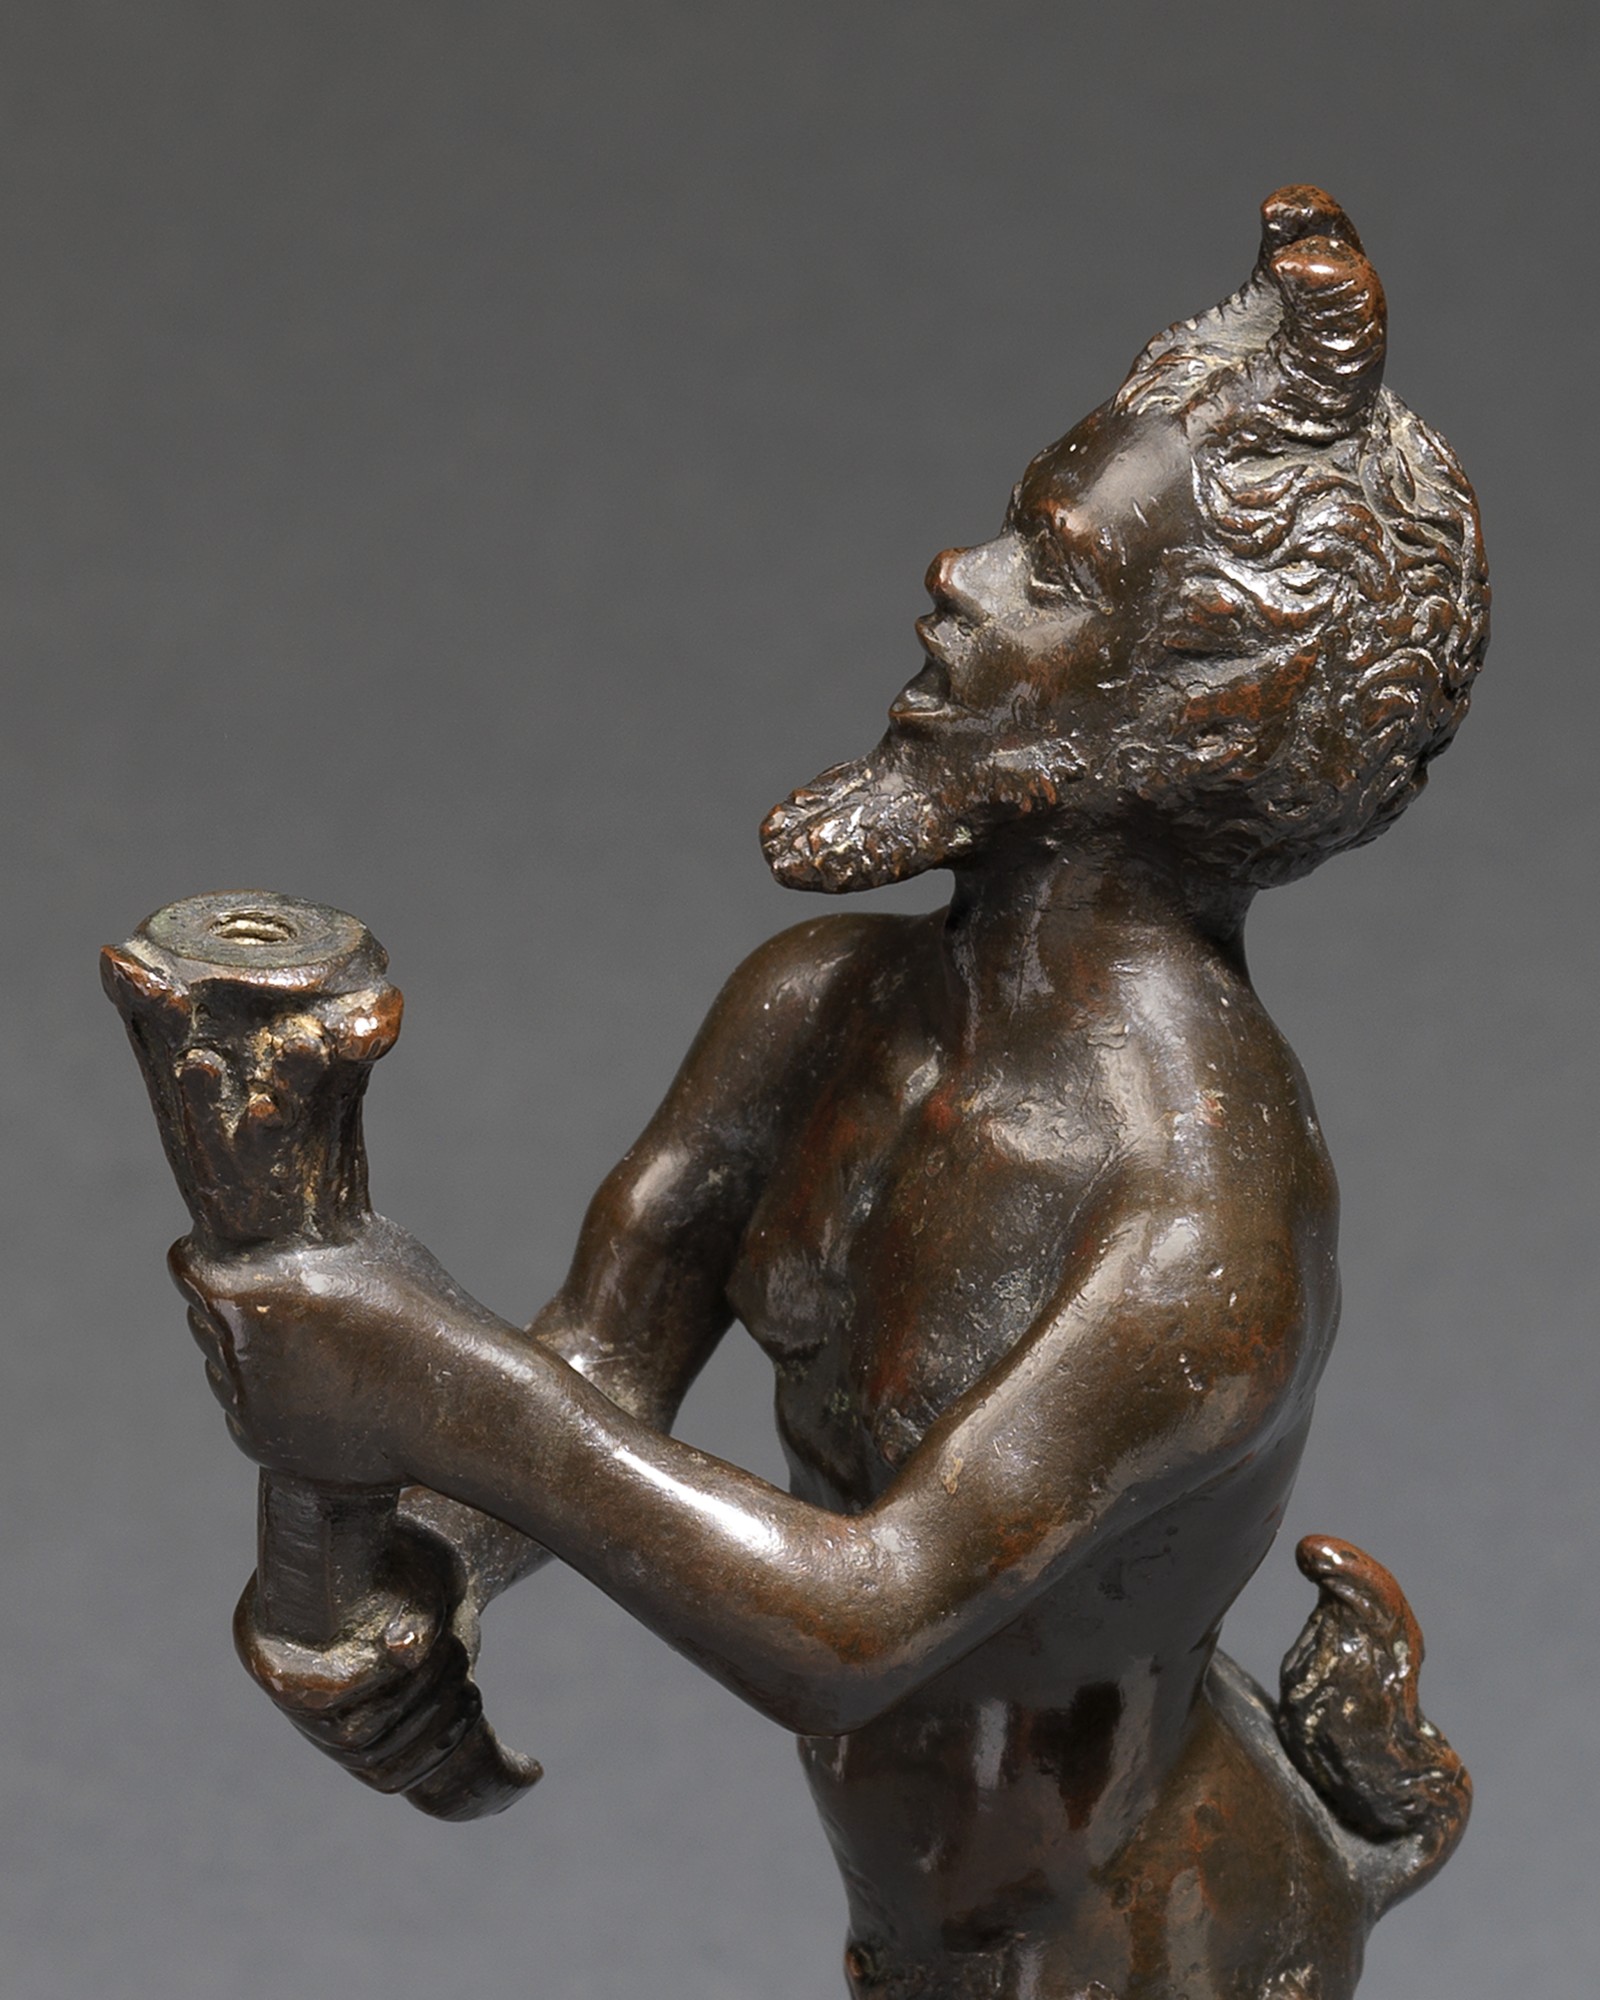 Faun, Attributed to the workshop of Desiderio da Firenze(active Padua 1532 – 1545), Italy, Pad